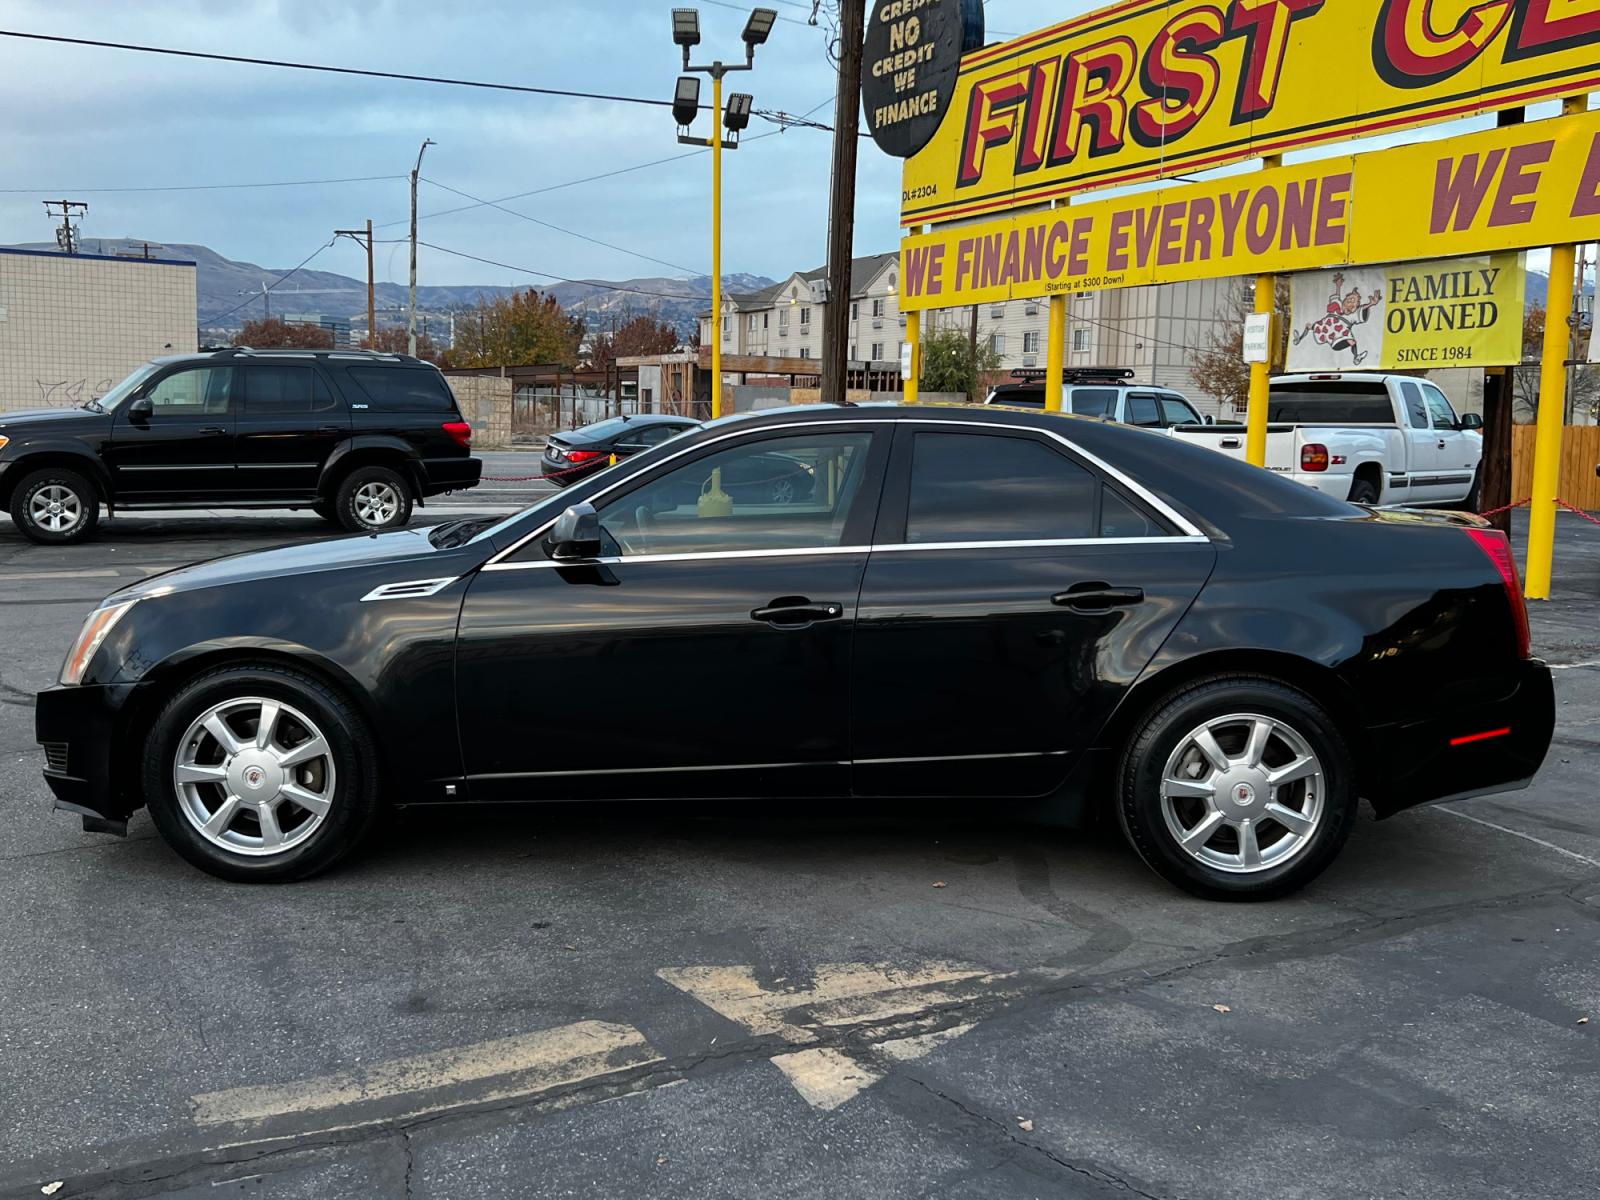 2008 Black /Black Leather Cadillac CTS 3.6L (1G6DM577980) with an 3.6L V6 engine, Automatic transmission, located at 801 South State Street, Salt Lake City, UT, 84111, (801) 328-0098, 40.751953, -111.888206 - Life is crazy. Now is the time to buy! All of our prices are just dollars above our cost. These prices will change as soon as life isn't so crazy. So please call or come in. We are here to save you a lot of money! Our service department is OPEN DAILY to help with any of your service need - Photo #1